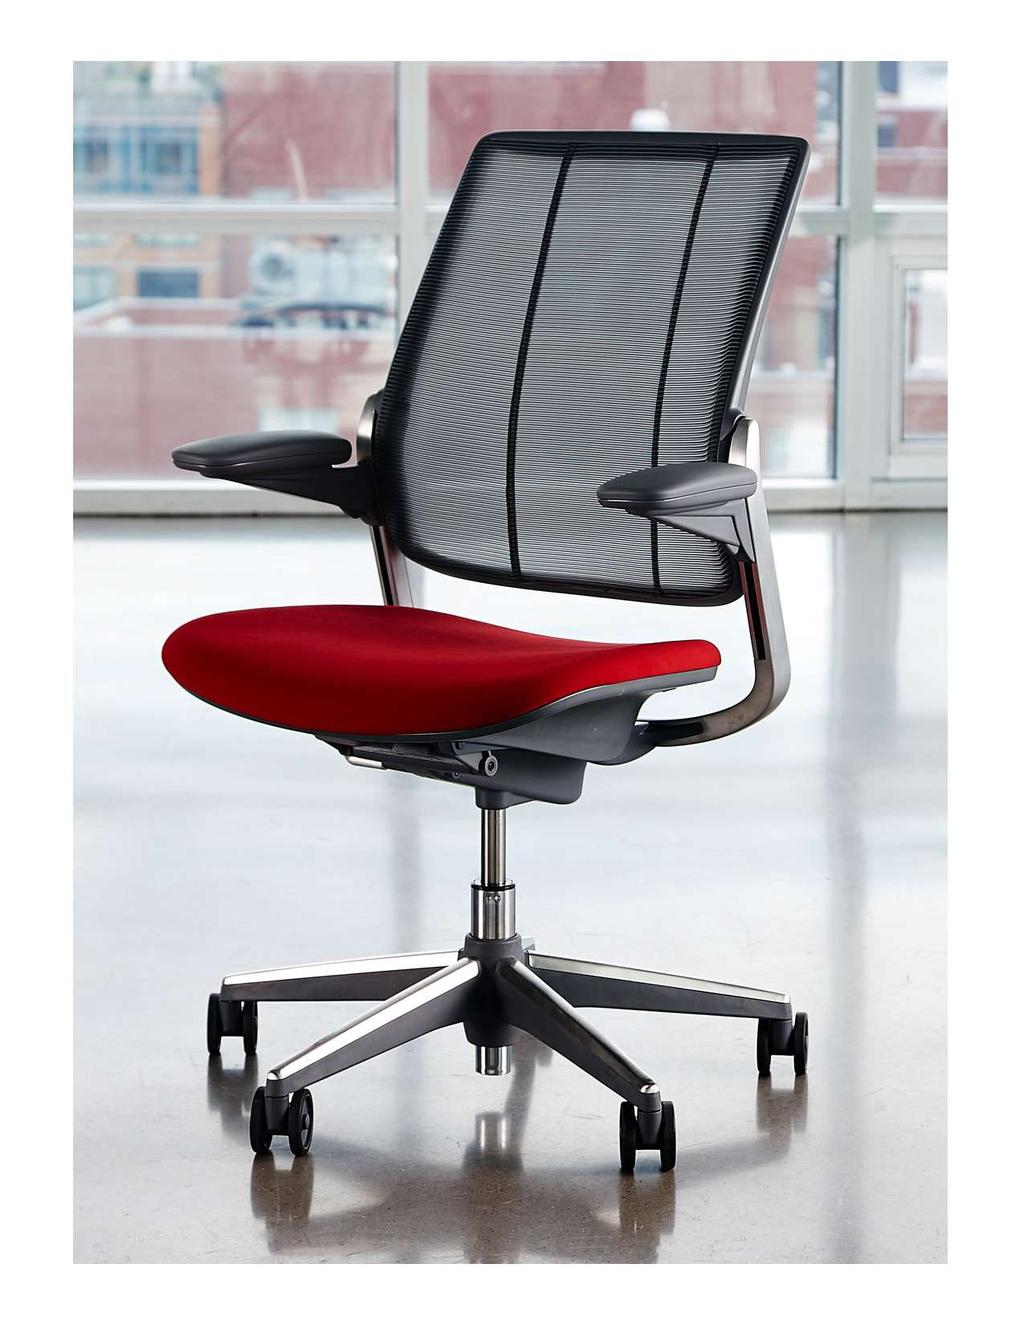 DIFFRIENT SMART Ideal for any designed environment, Diffrient Smart features aesthetics that are as minimal visually as the chair is functional.